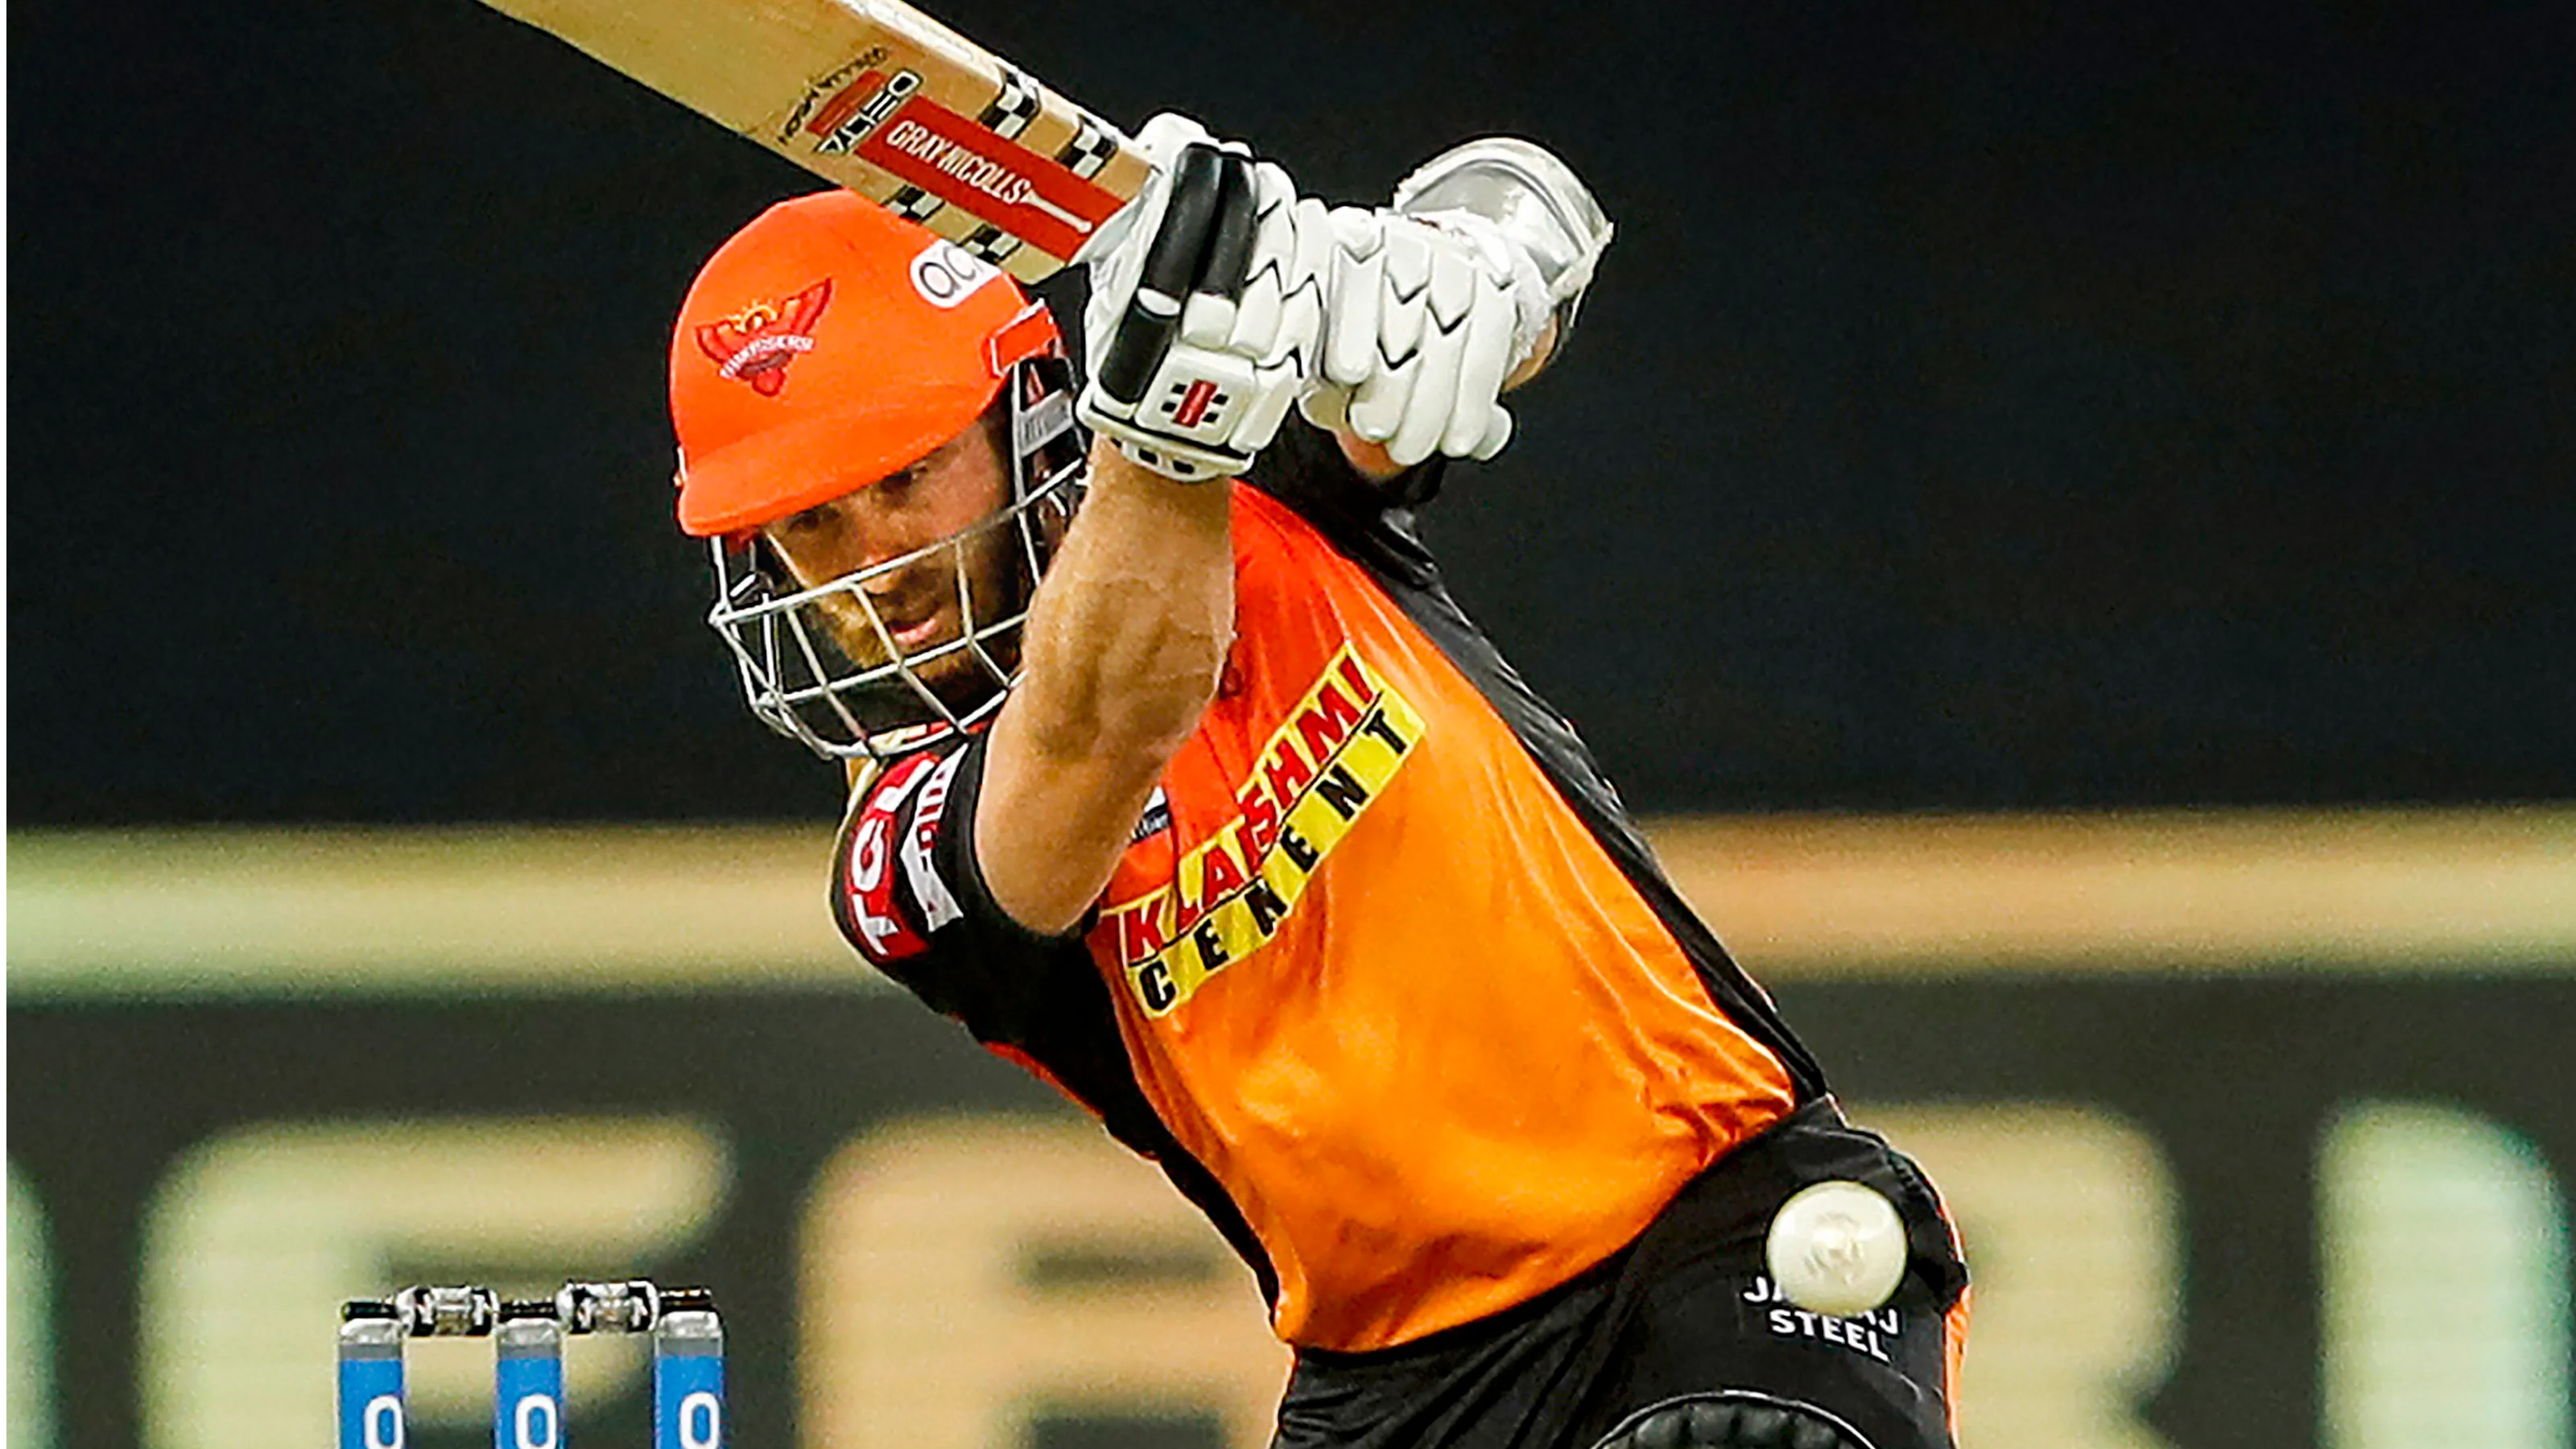 IPL 2021: Williamson says SRH need to reassess after loss vs KKR